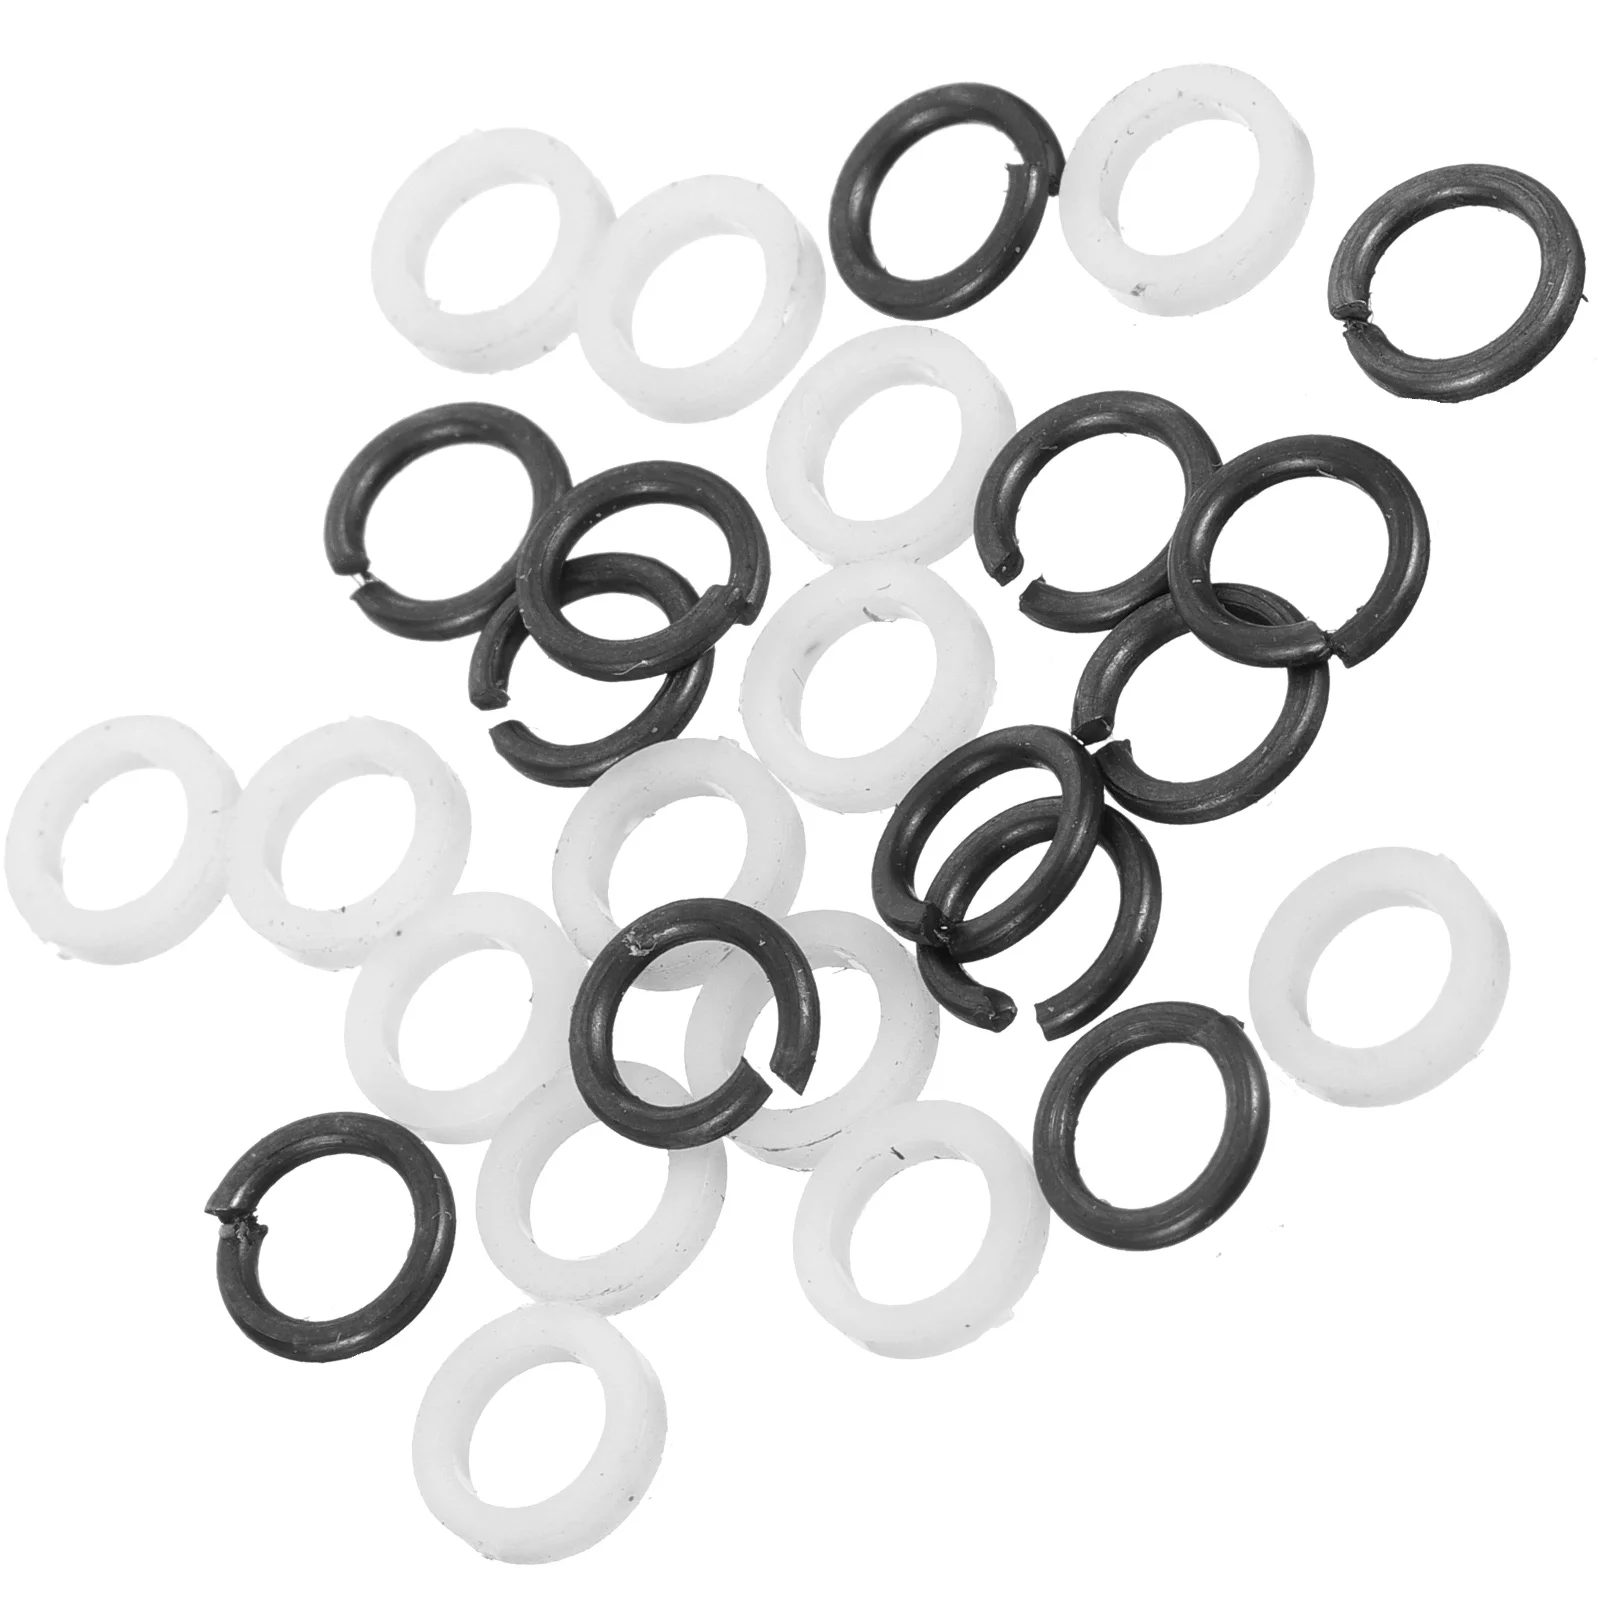 

Guitar Tuning Peg Tuner Washer Plastic Tuner Gaskets for Guitar Tuners Metal Tuner Spacer Guitar Supply Accessory